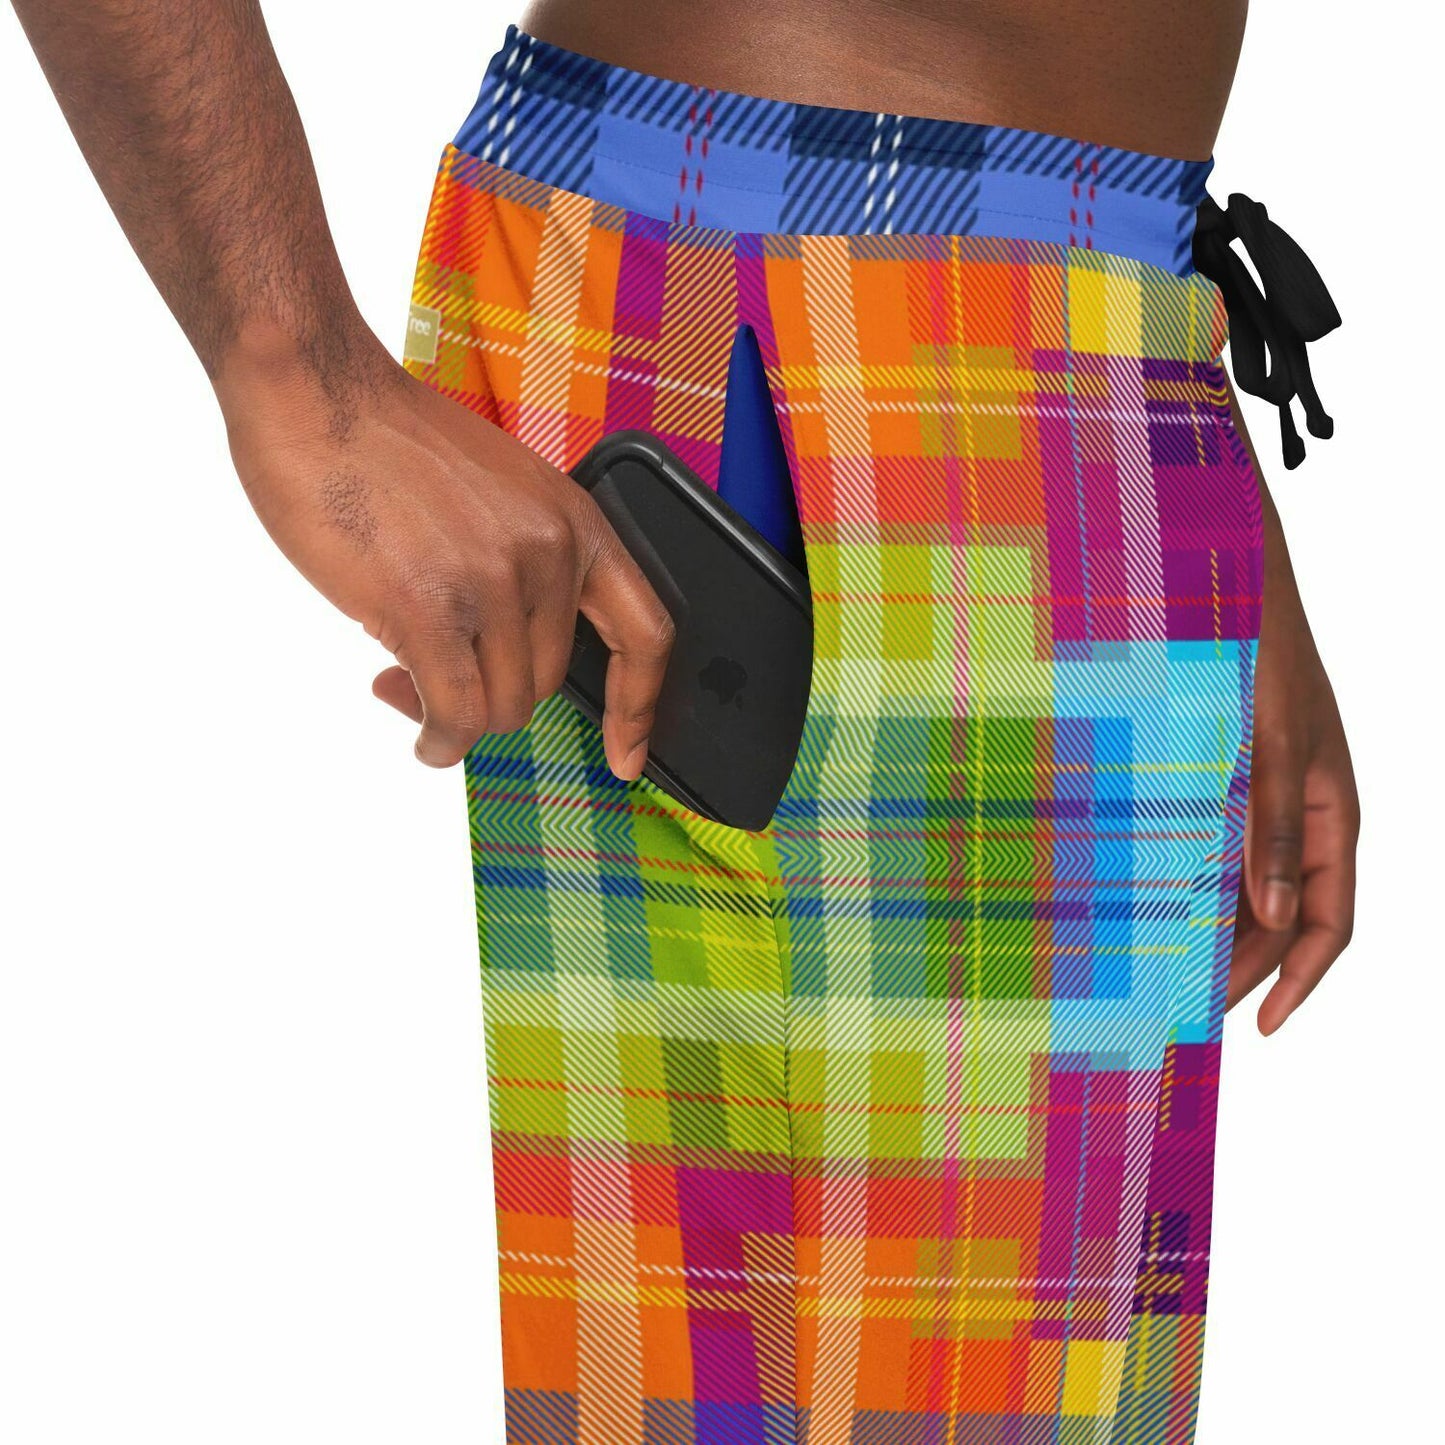 Creole Queen Bright Madras Plaid Eco-Poly Unisex Joggers